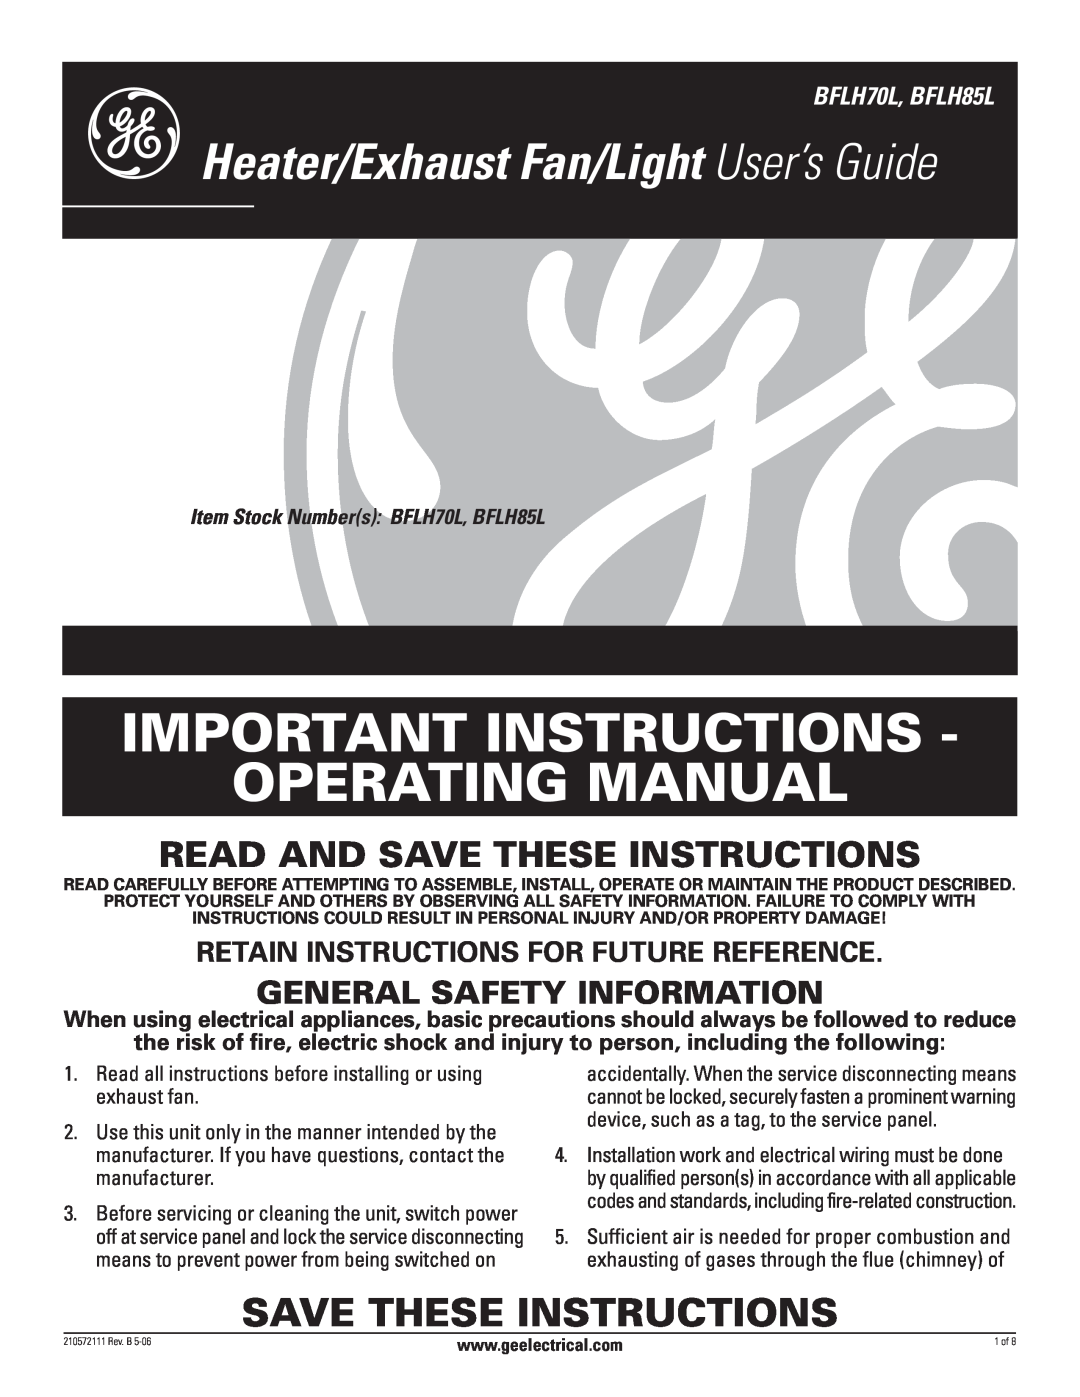 GE BFLH70L, BFLH85L manual General Safety Information, Retain Instructions For Future Reference, Save These Instructions 